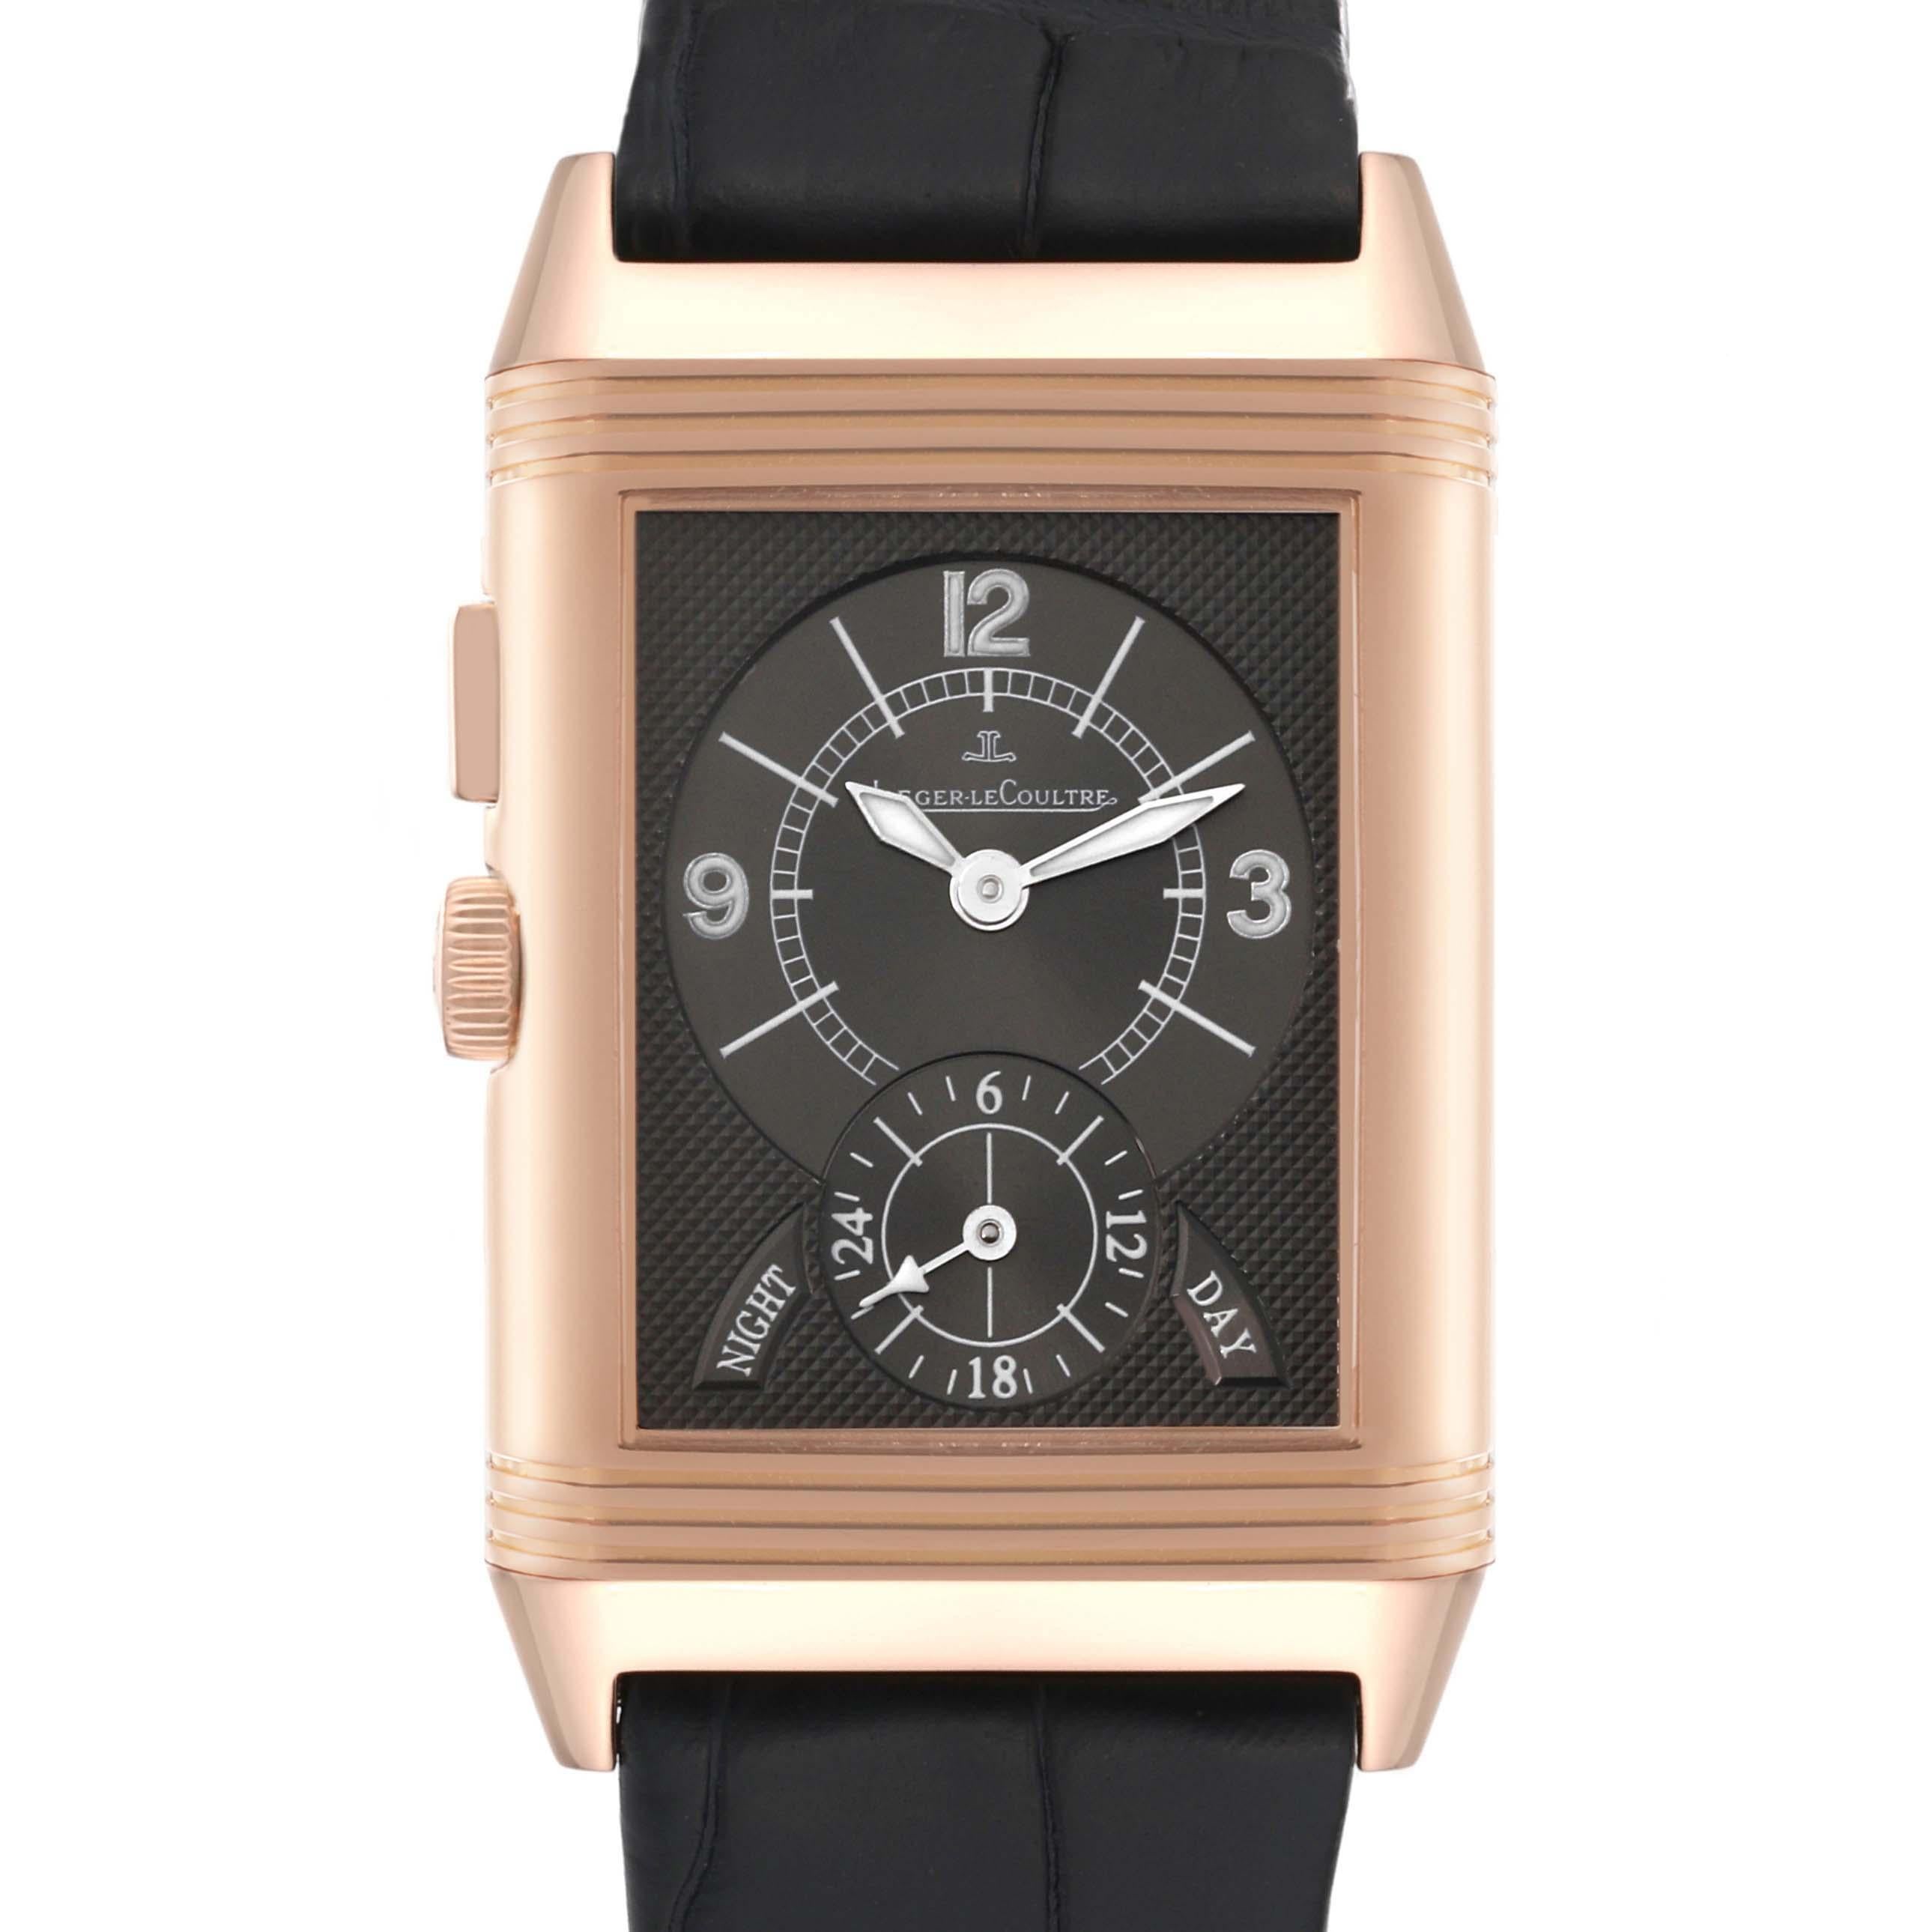 Jaeger LeCoultre Reverso Duoface Rose Gold Mens Watch 272.2.54 Q2712410. Manual winding movement. 18K rose gold 42.2 x 26.0 mm rectangular rotating case. Dual time jump hour button on the side of the case. 18K rose gold ribbed bezel. Scratch